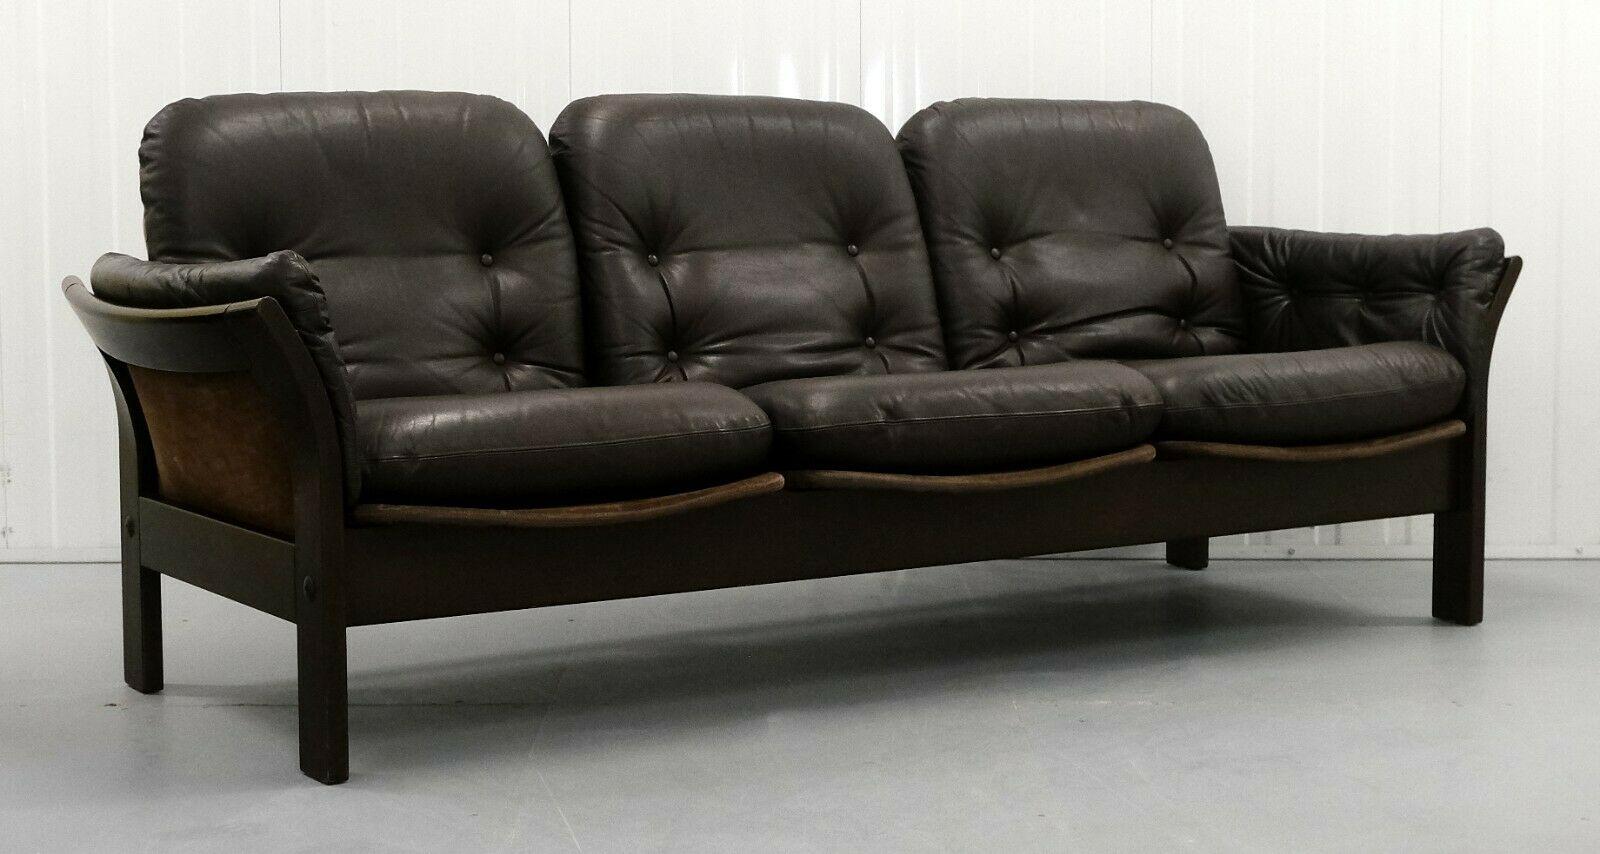 Stunning Thams Kvalitet Brown Leather & Suede Three Seater Sofa Bentwood Frame For Sale 3